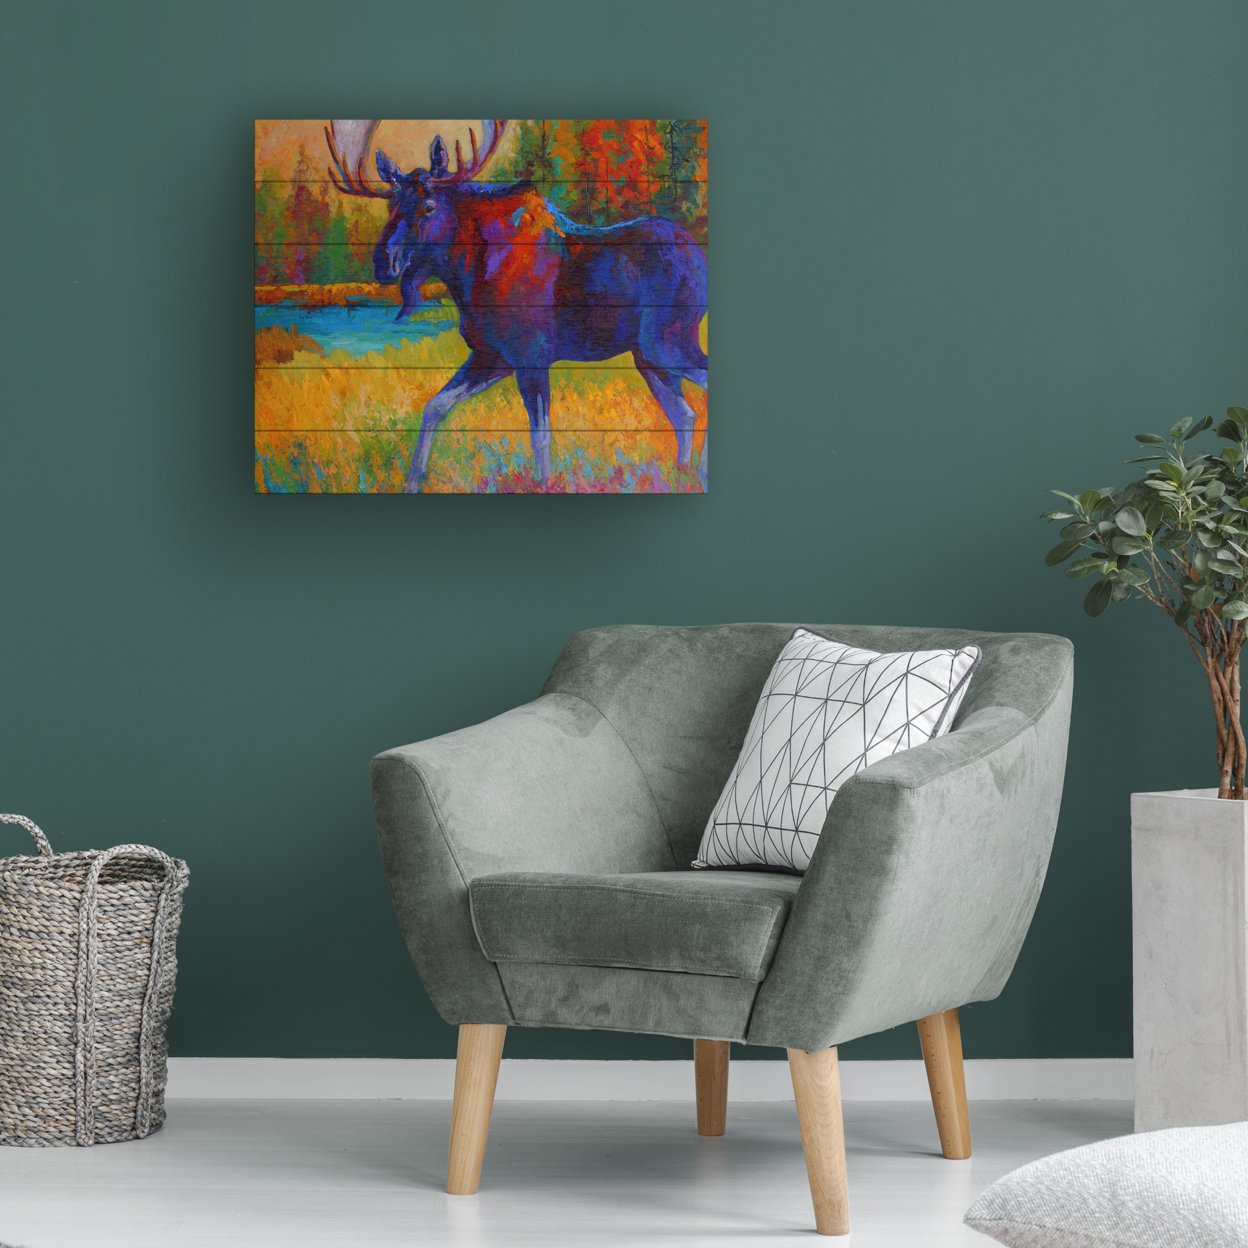 Wooden Slat Art 18 X 22 Inches Titled Majestic Moose Ready To Hang Home Decor Picture